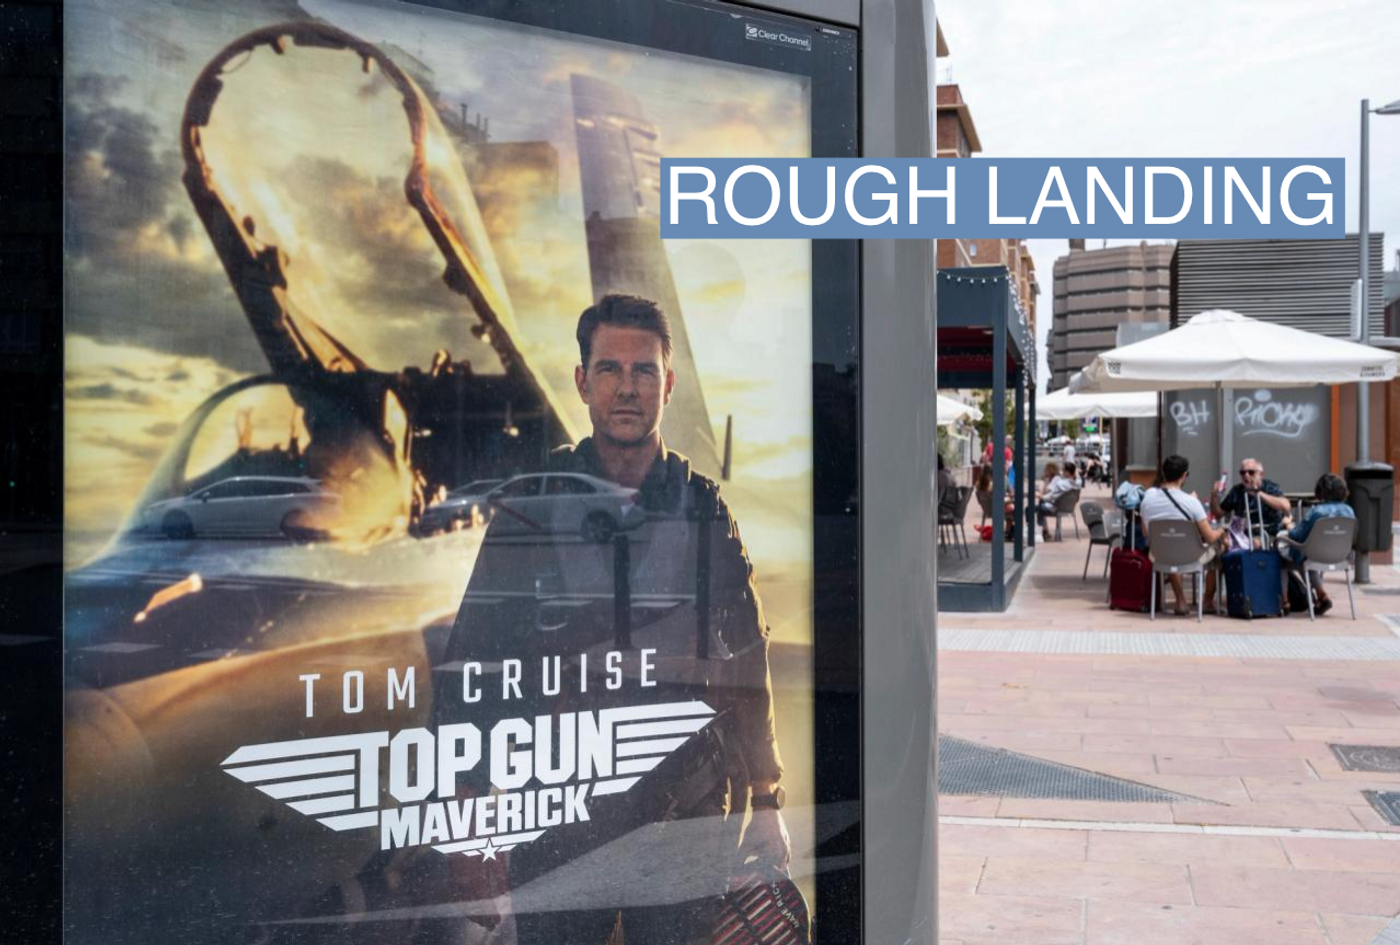 A street commercial advertisement poster from Paramount Pictures featuring Top Gun Maverick movie and American actor Tom Cruise in Spain.